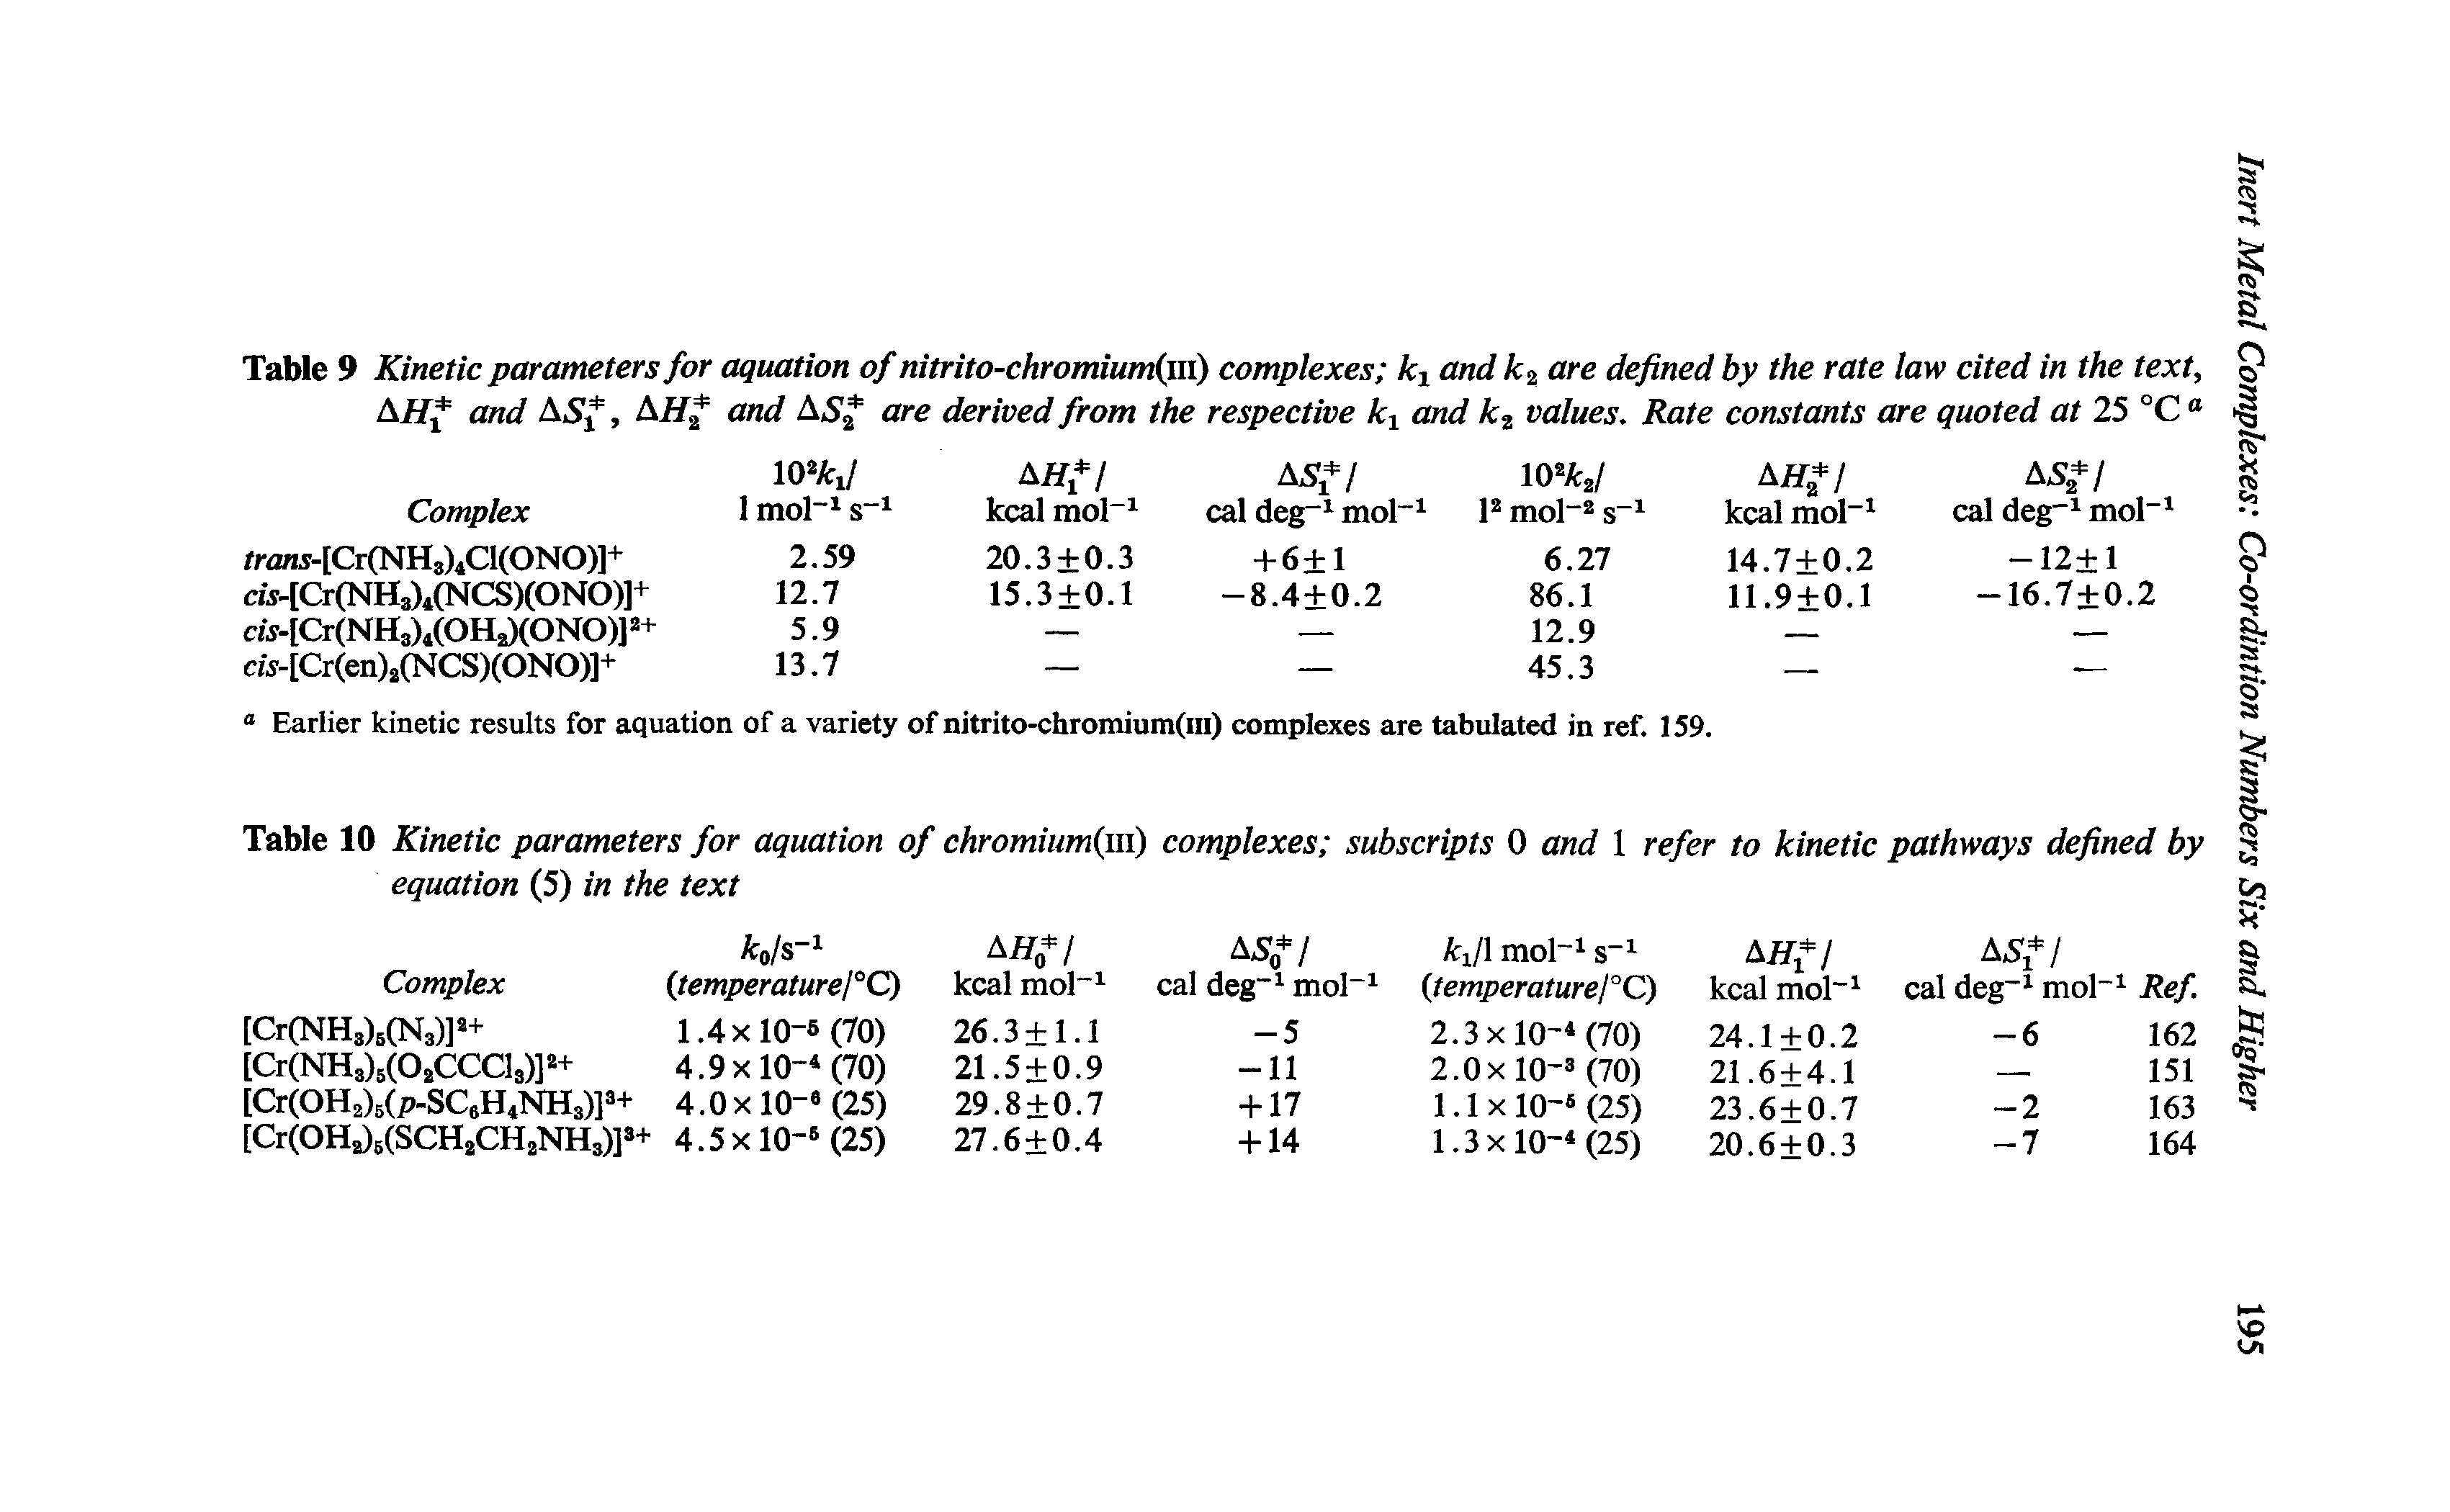 Table 10 Kinetic parameters for aquation of chromium(m) complexes subscripts 0 and 1 refer to kinetic pathways defined by equation (5) in the text...